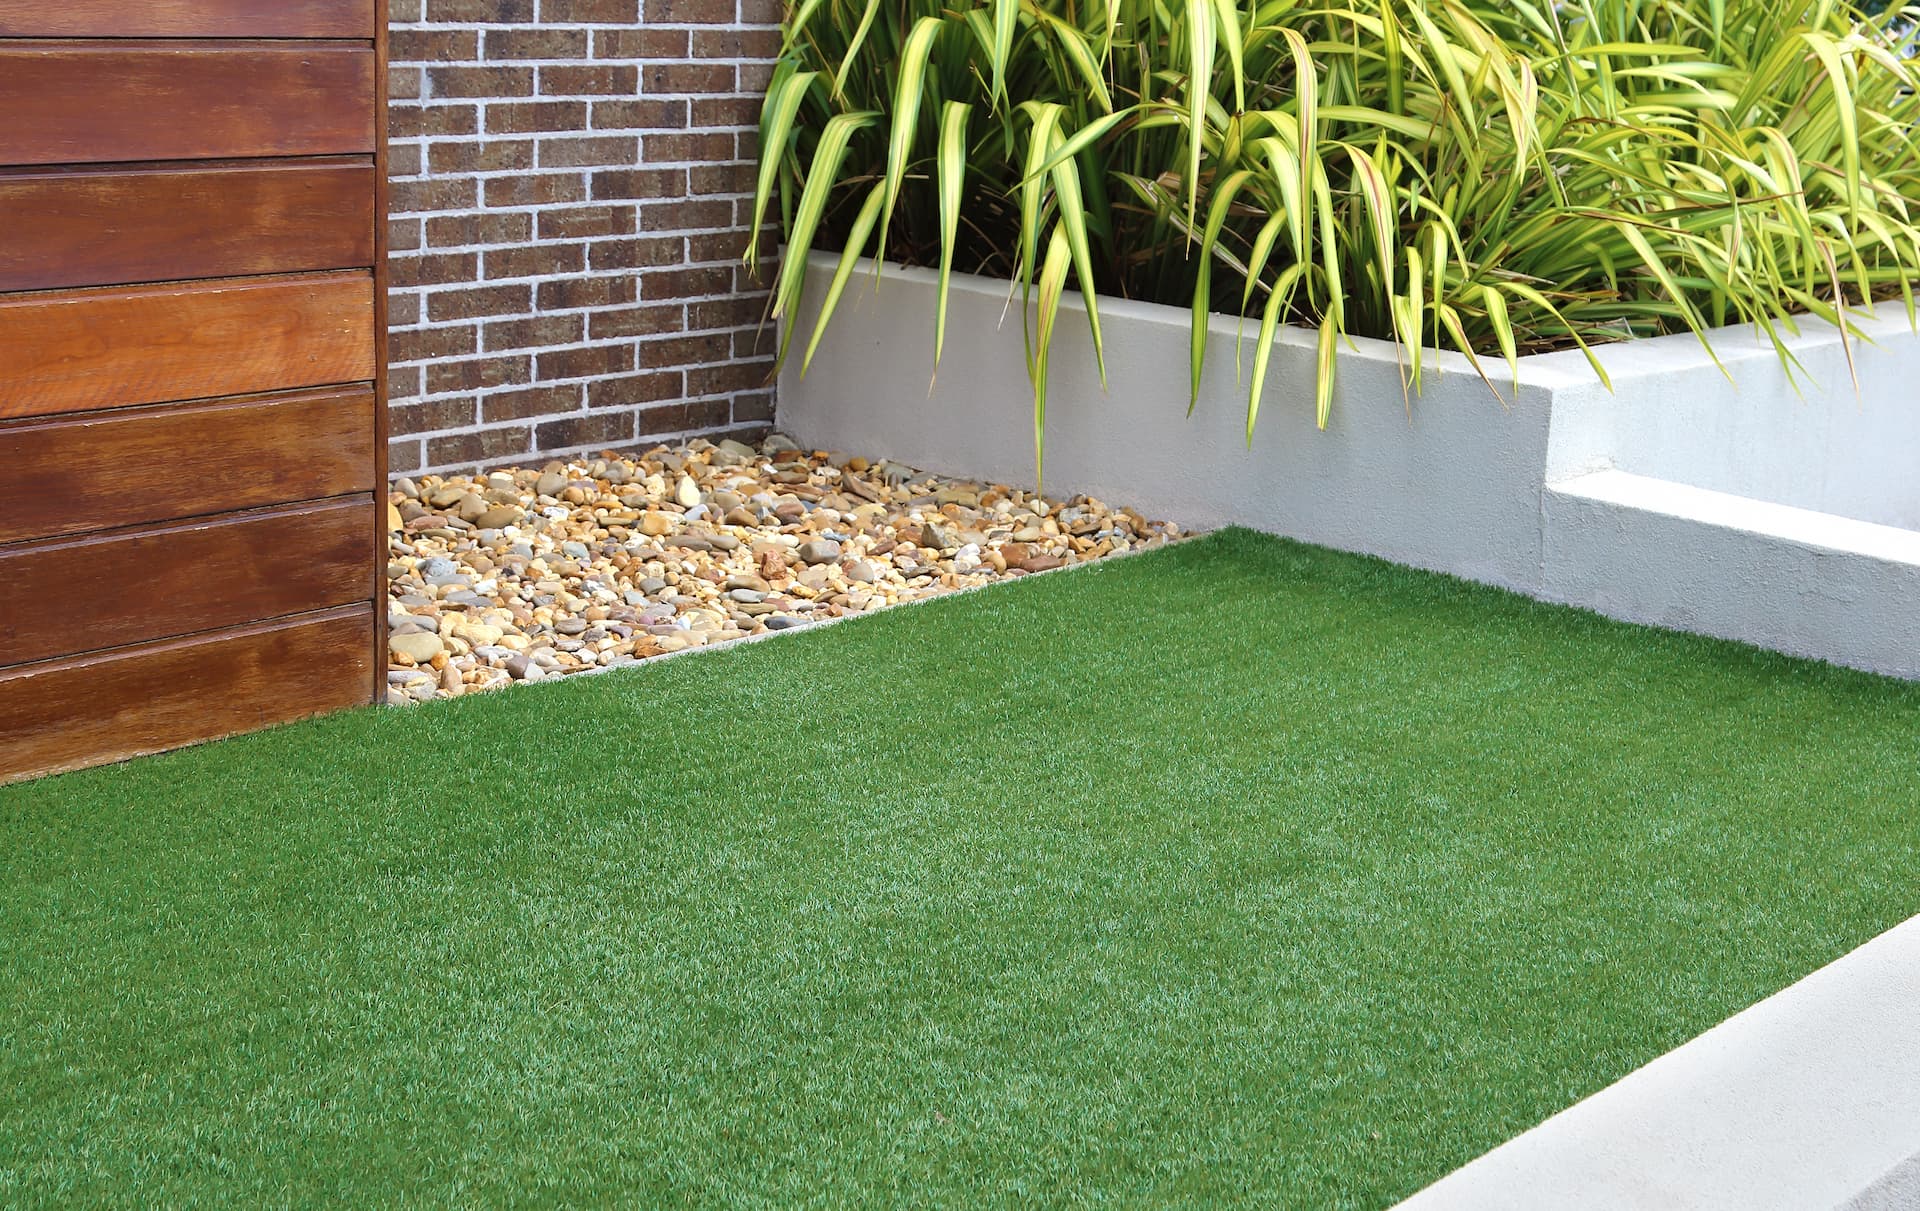 Licenced Artificial Grass & Turf services in Oldham